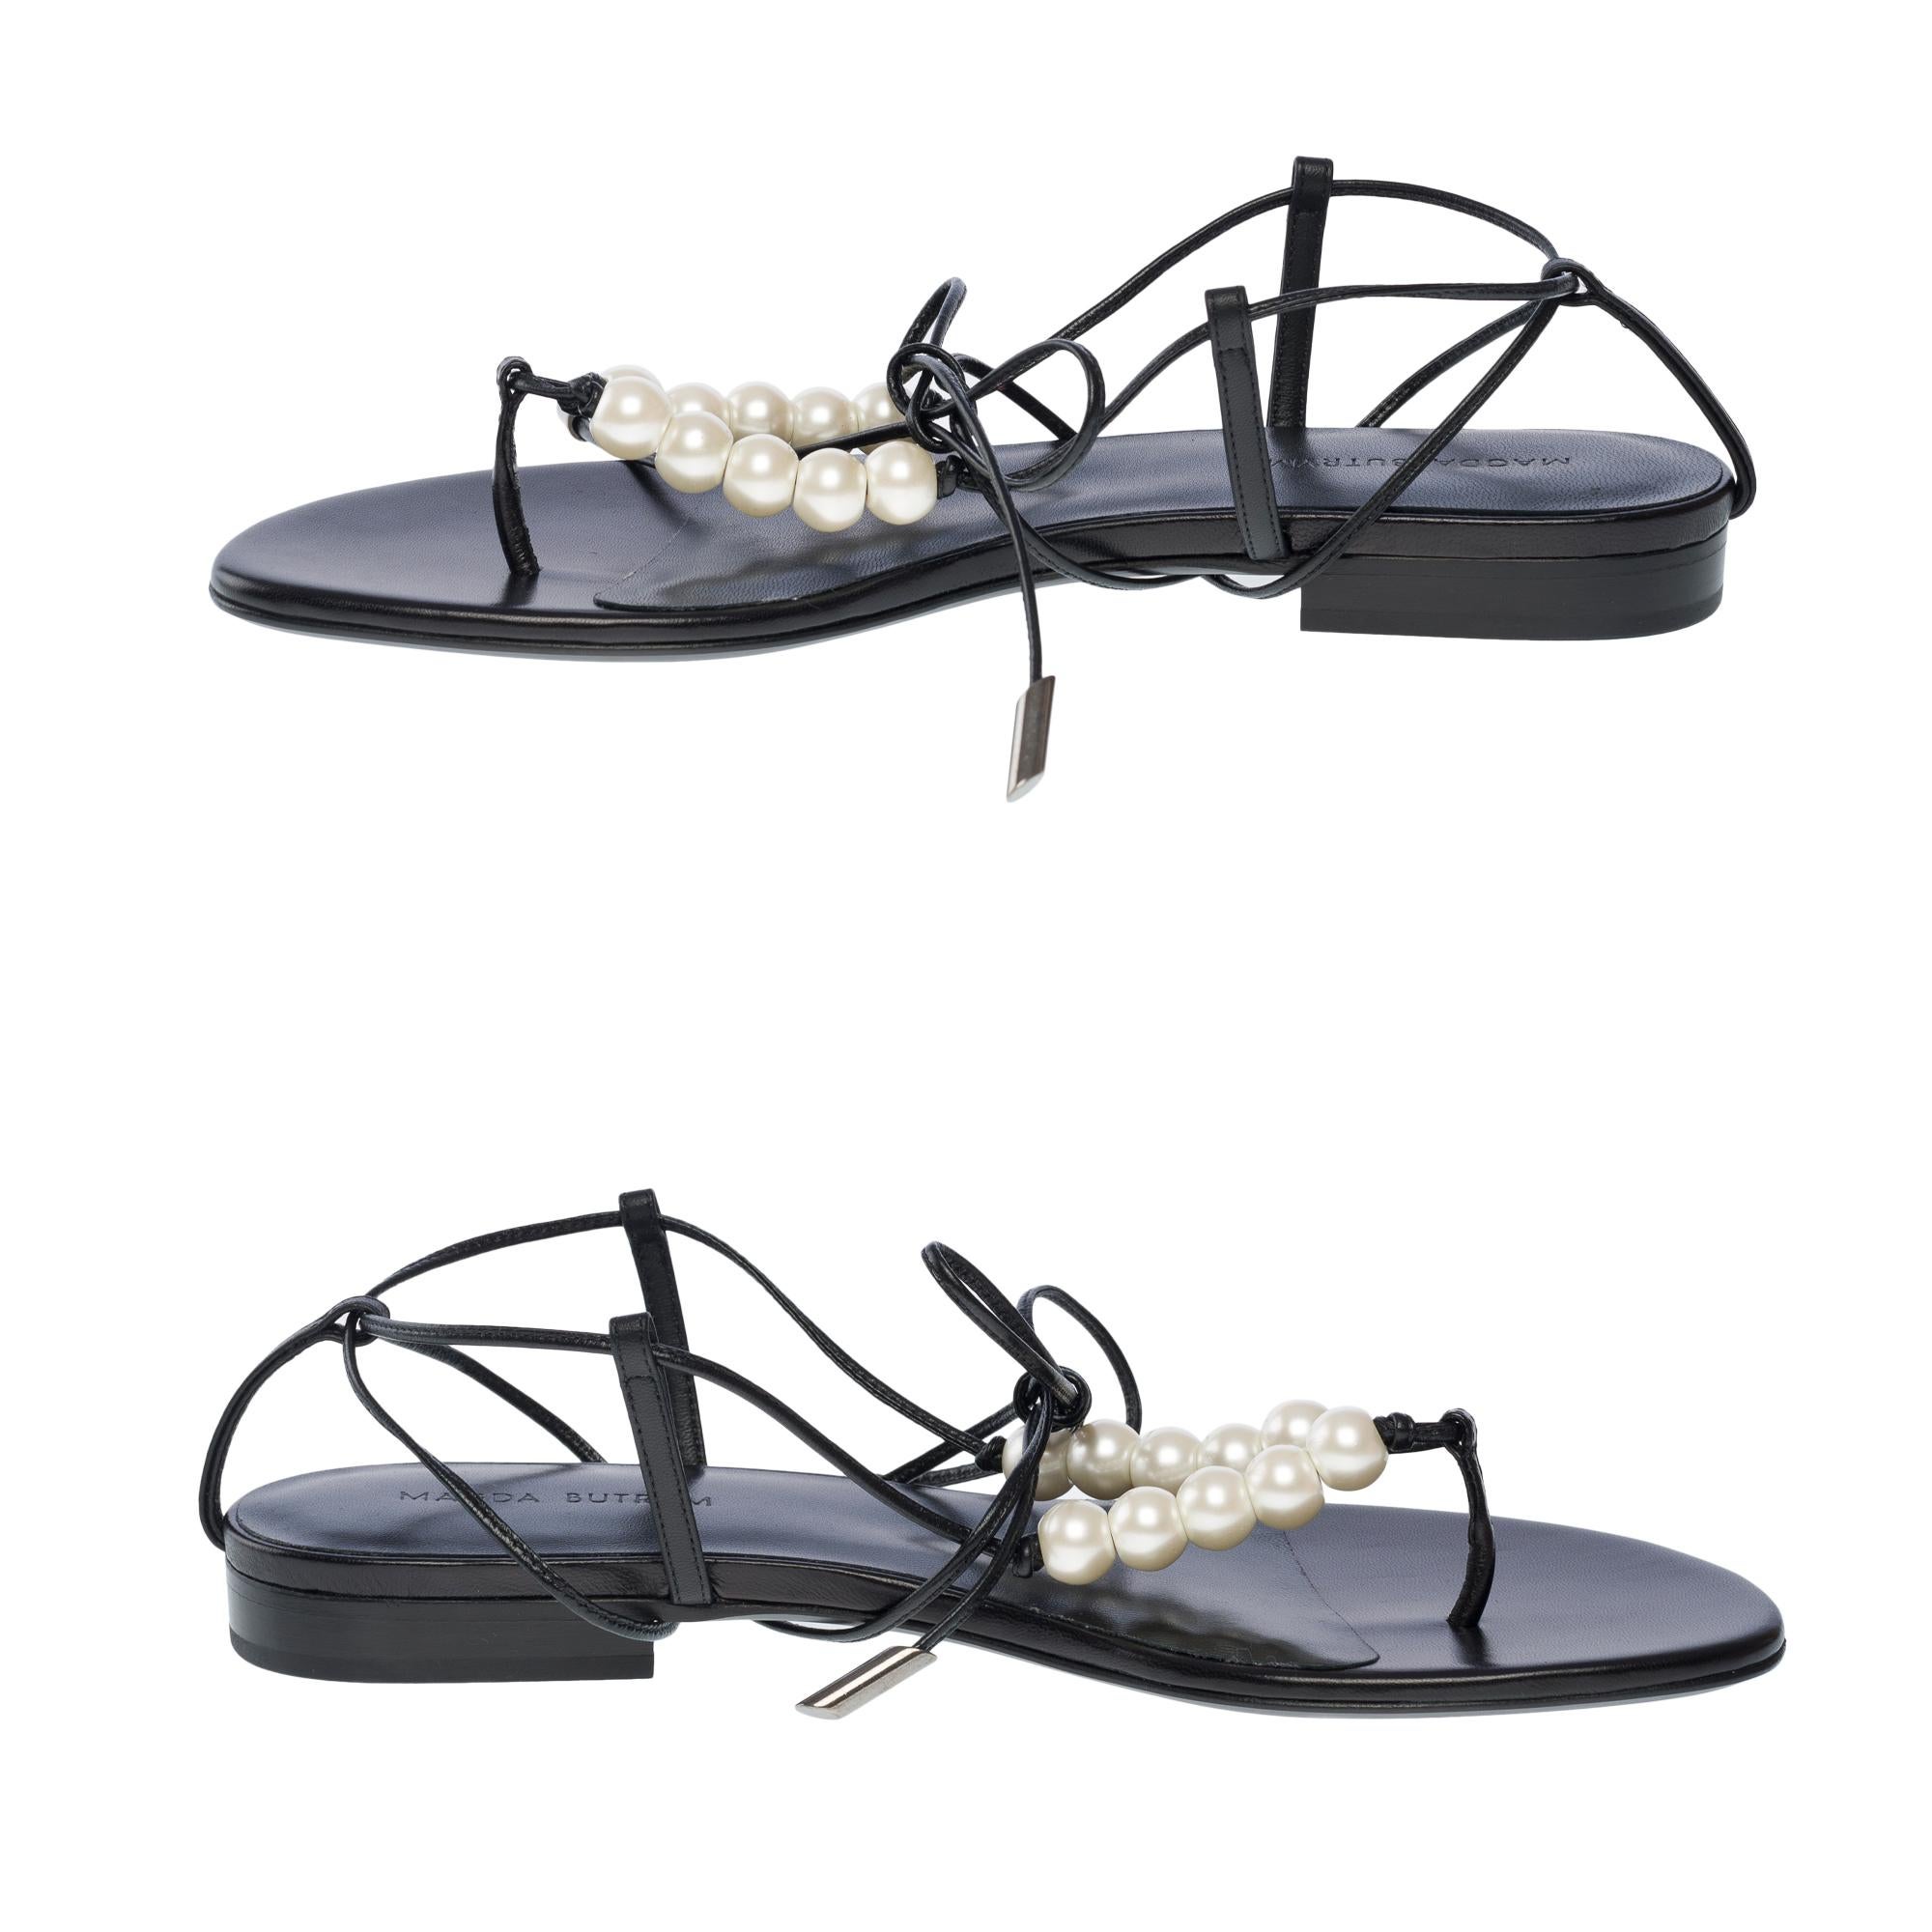 New Magda Butrym Flat Sandals  in black leather and faux-pearl , Size 38 For Sale 4